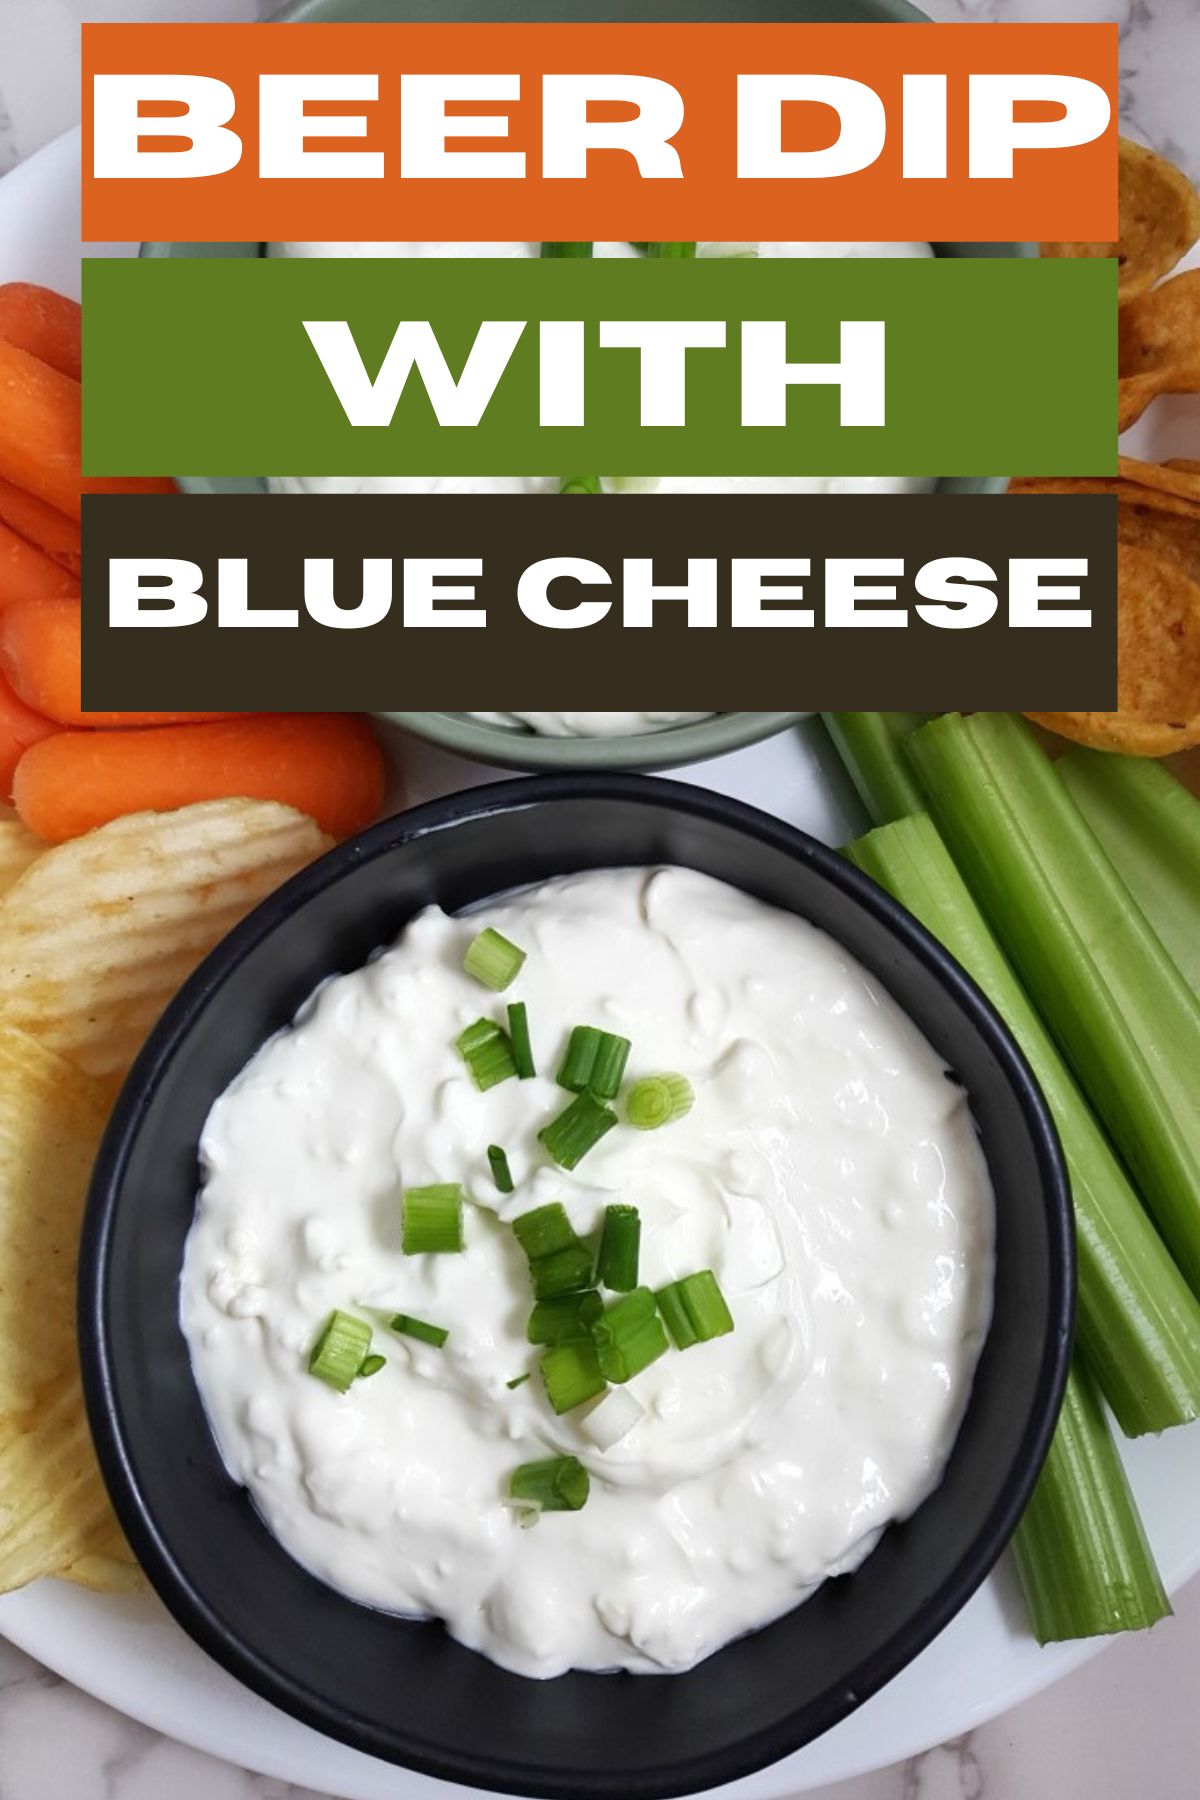 Beer Dip with Blue Cheese in a bowl.